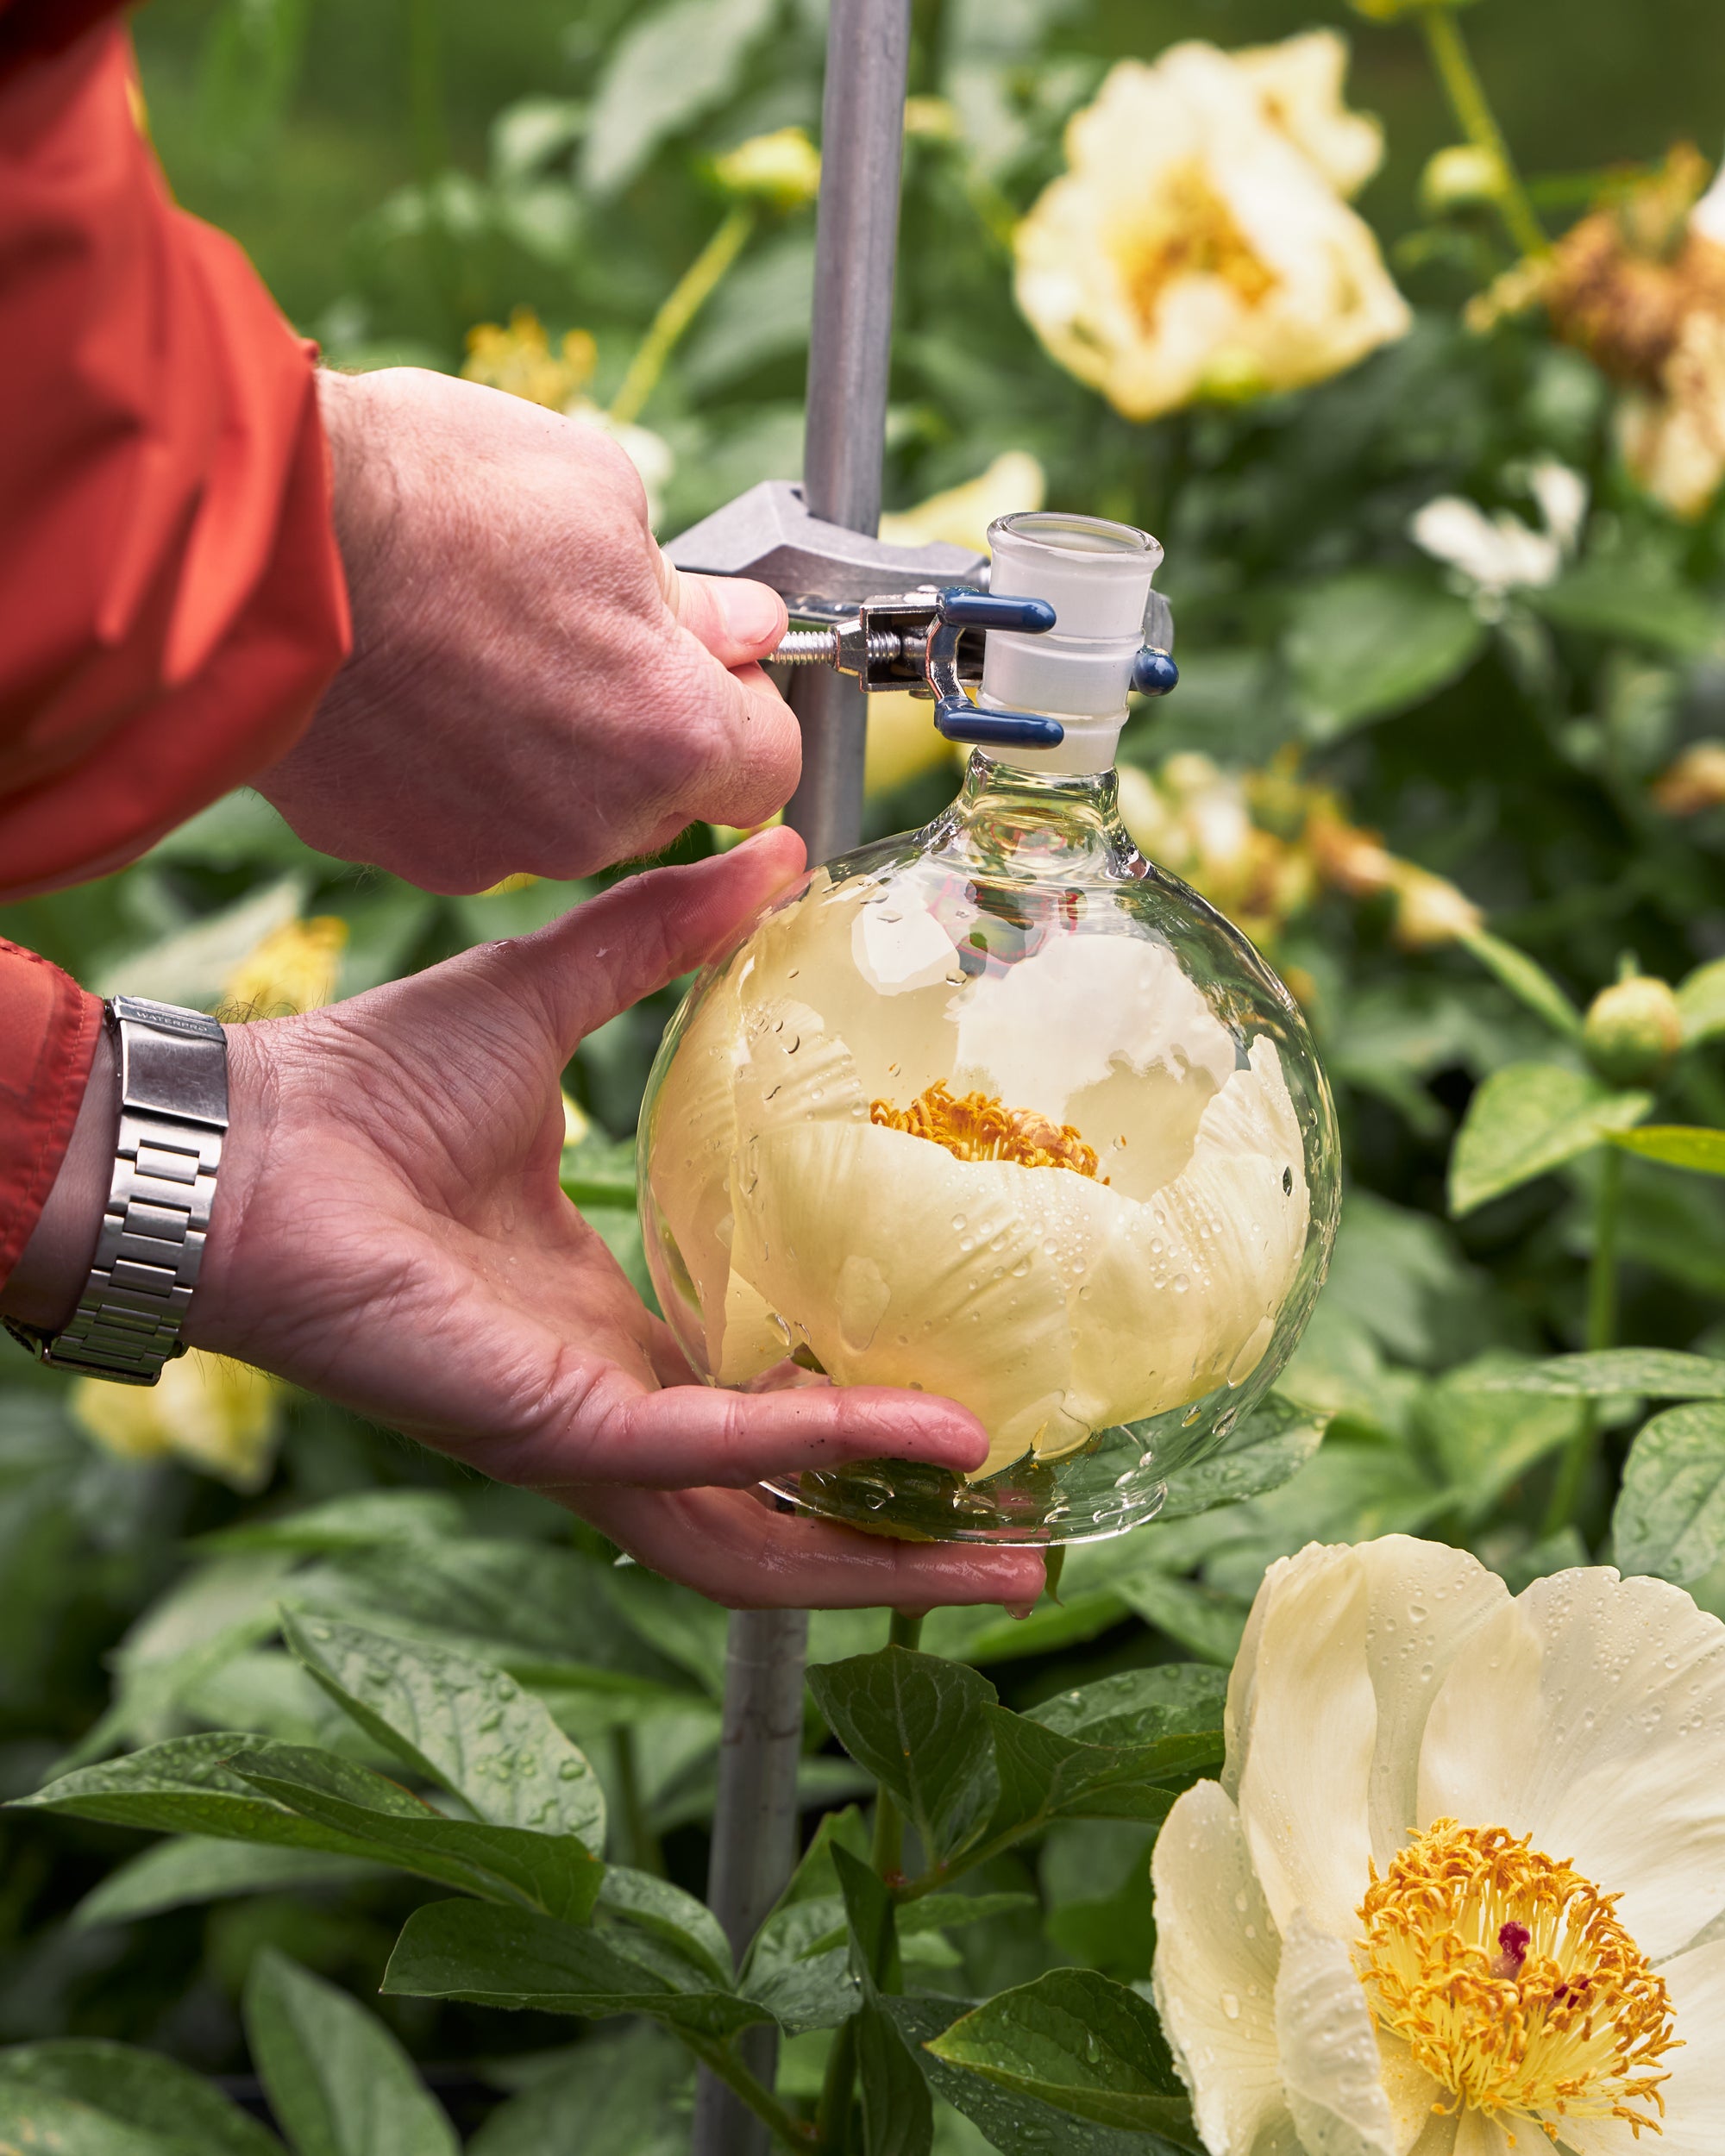 A peony flower with the glass headspace surrounding the flower showing how Caswell-Massey extract the scent of the flowers without hurting the flower